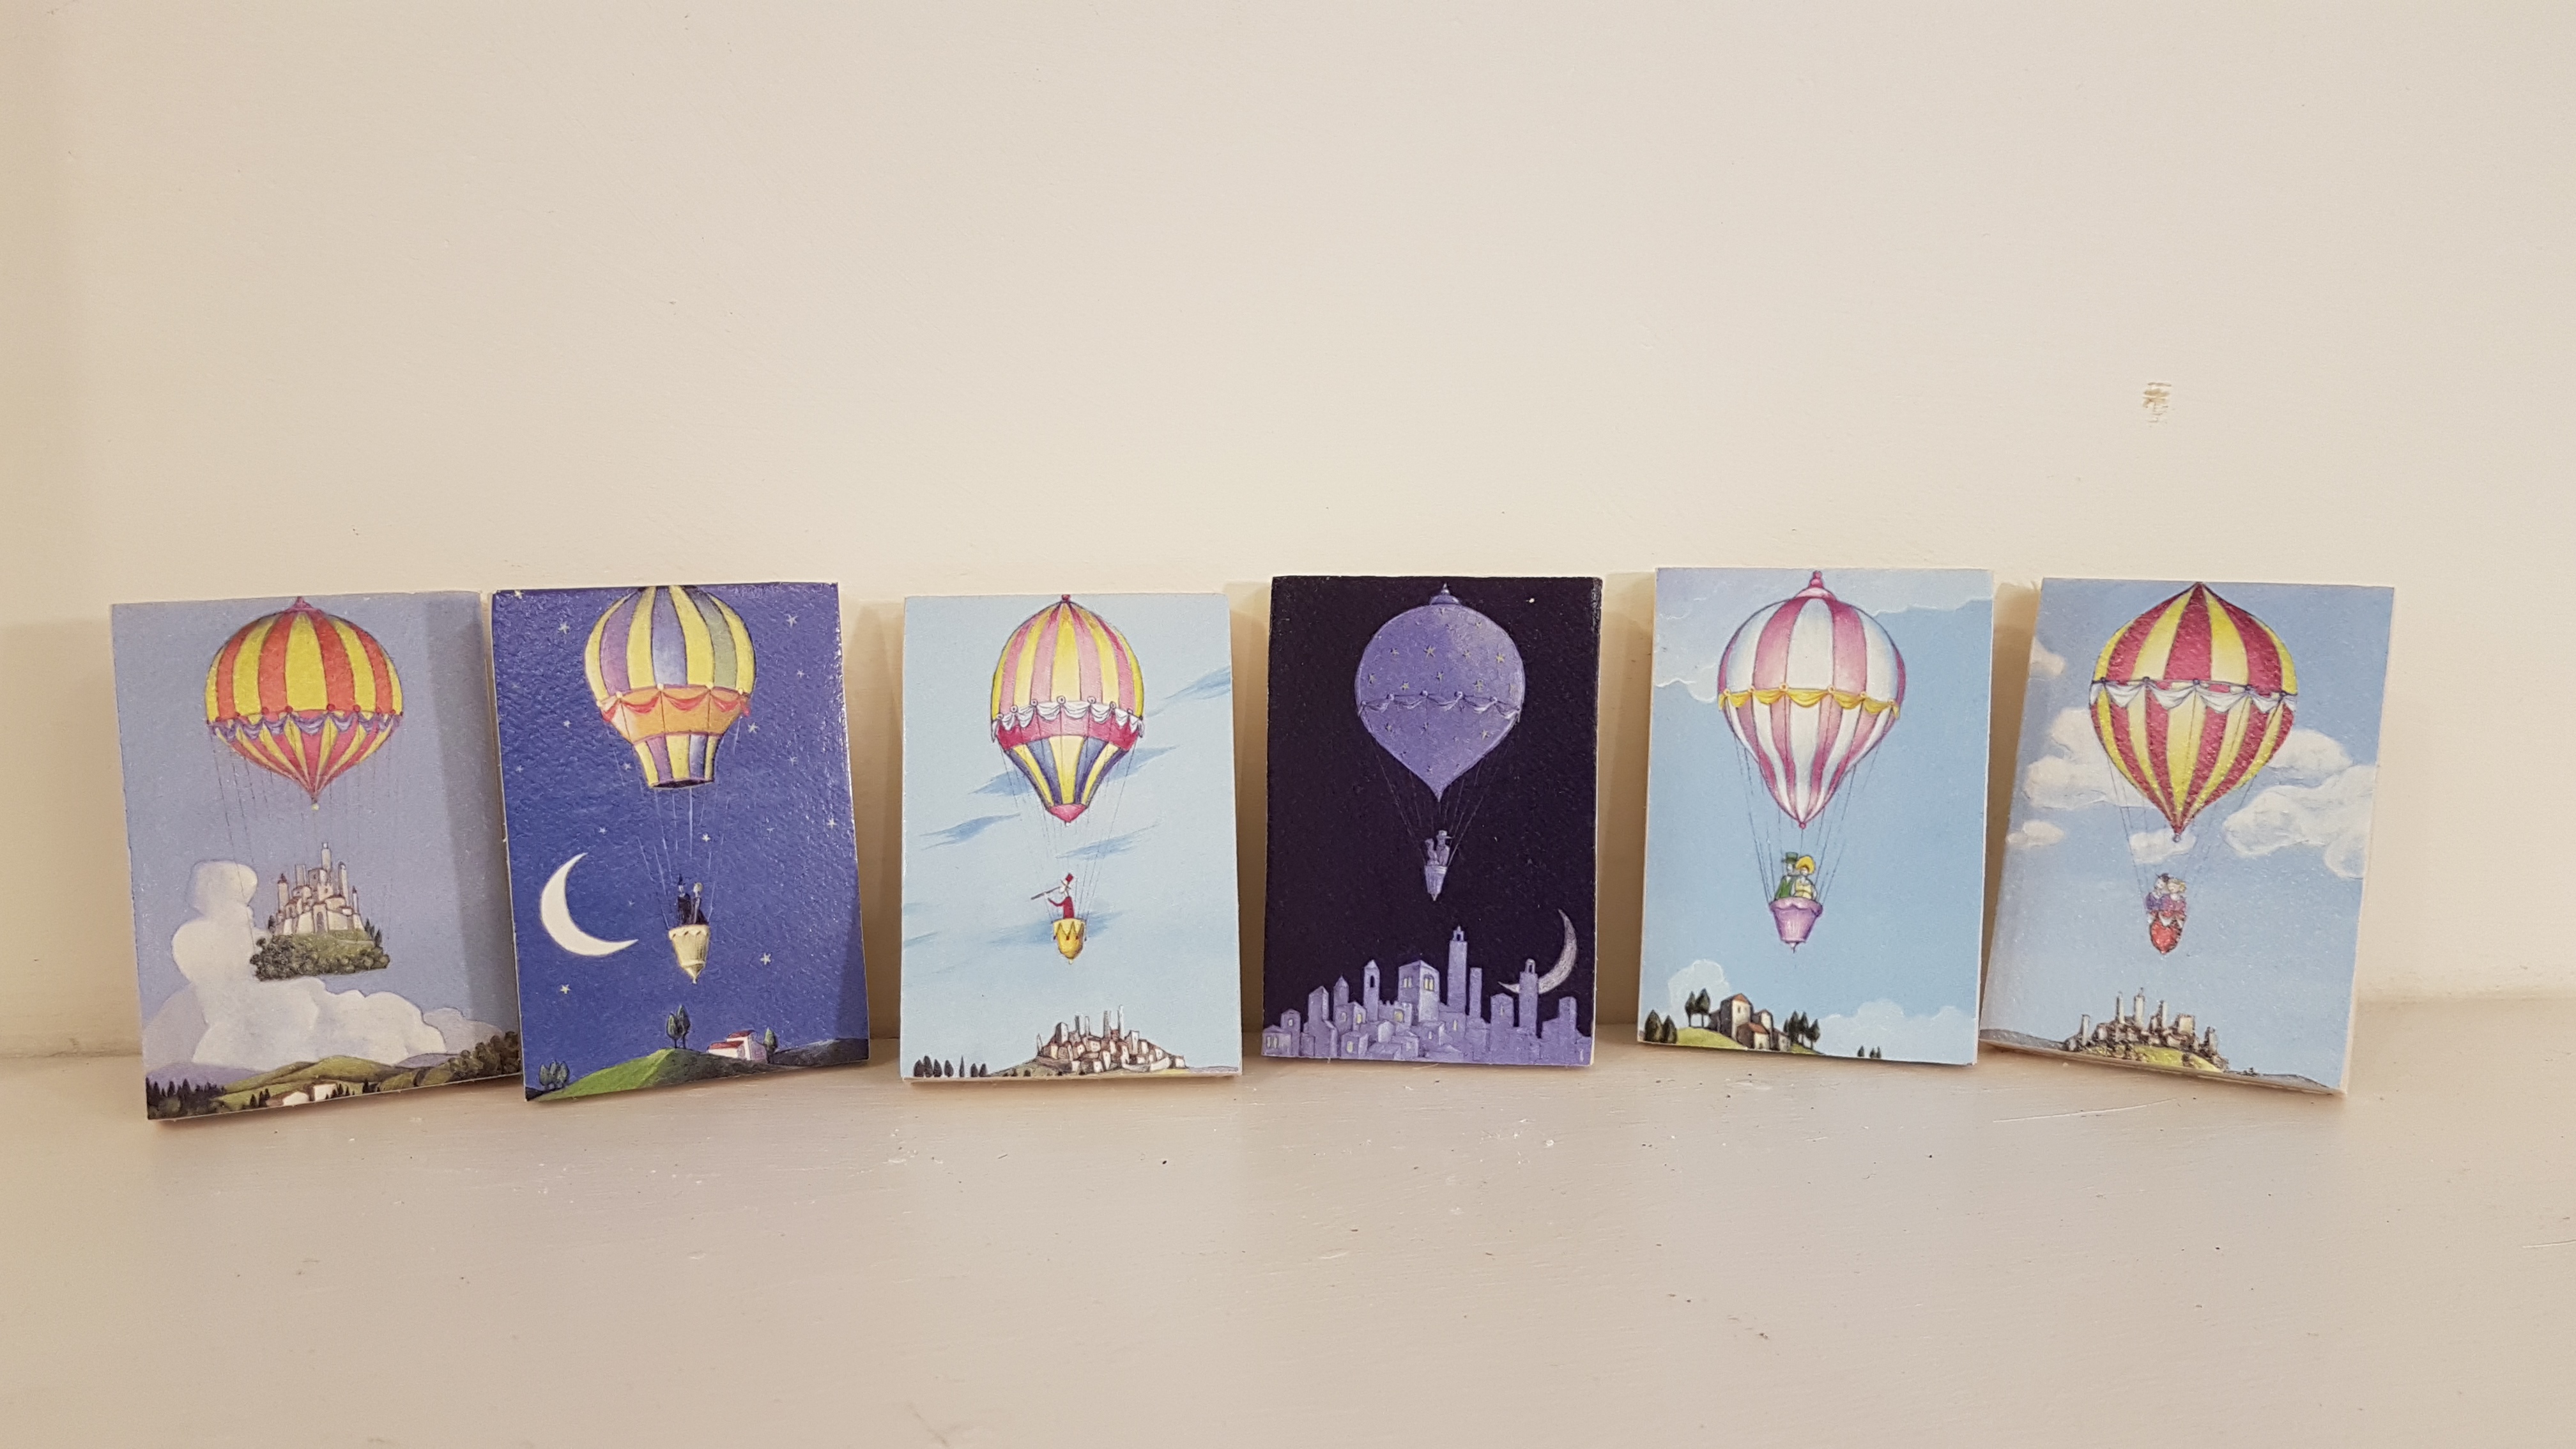 Magneti Mongolfiere - Hot air balloons magnets